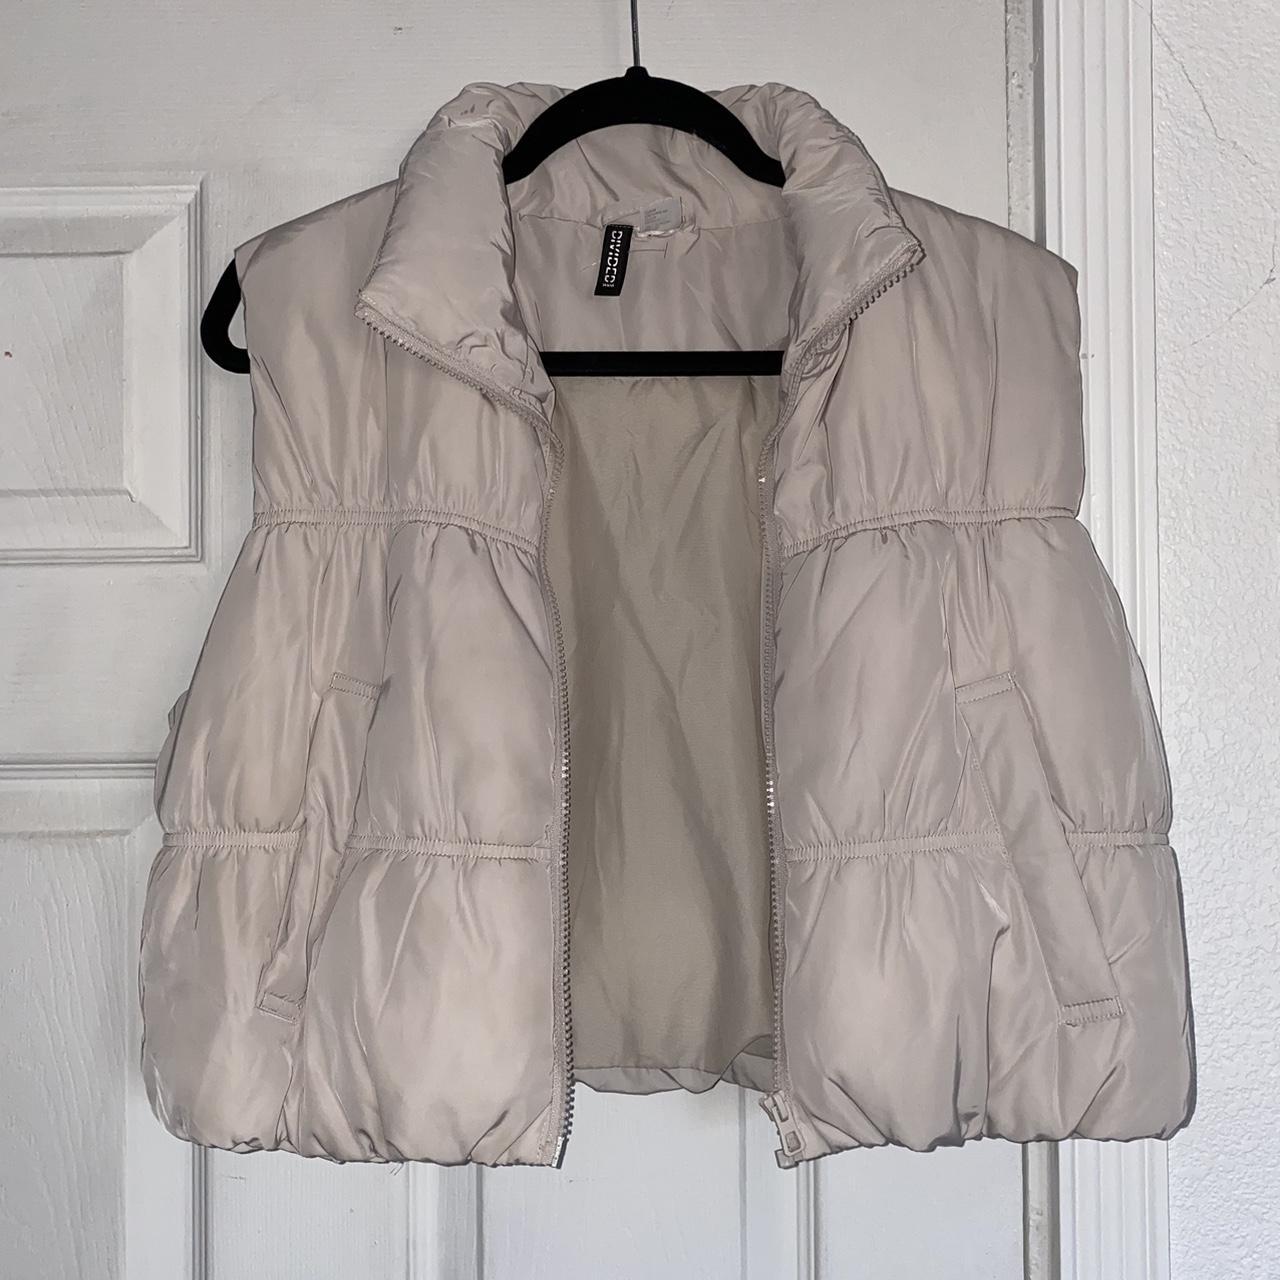 H&M Cream Puffer Vest Love this! It’s so cute with... - Depop